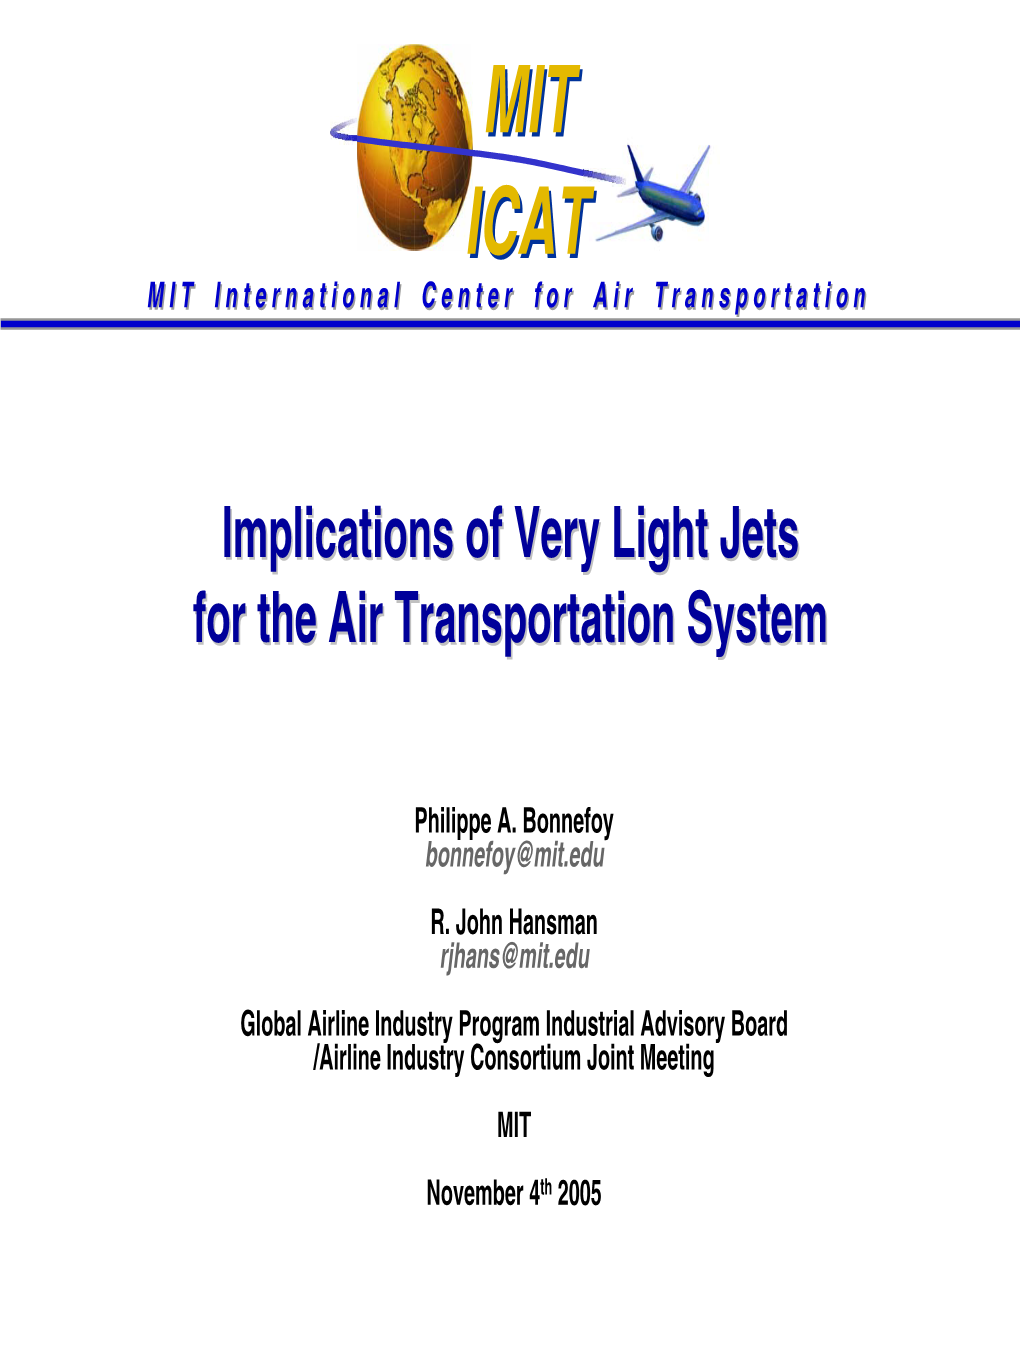 Implications of Very Light Jets for the Air Transportation System